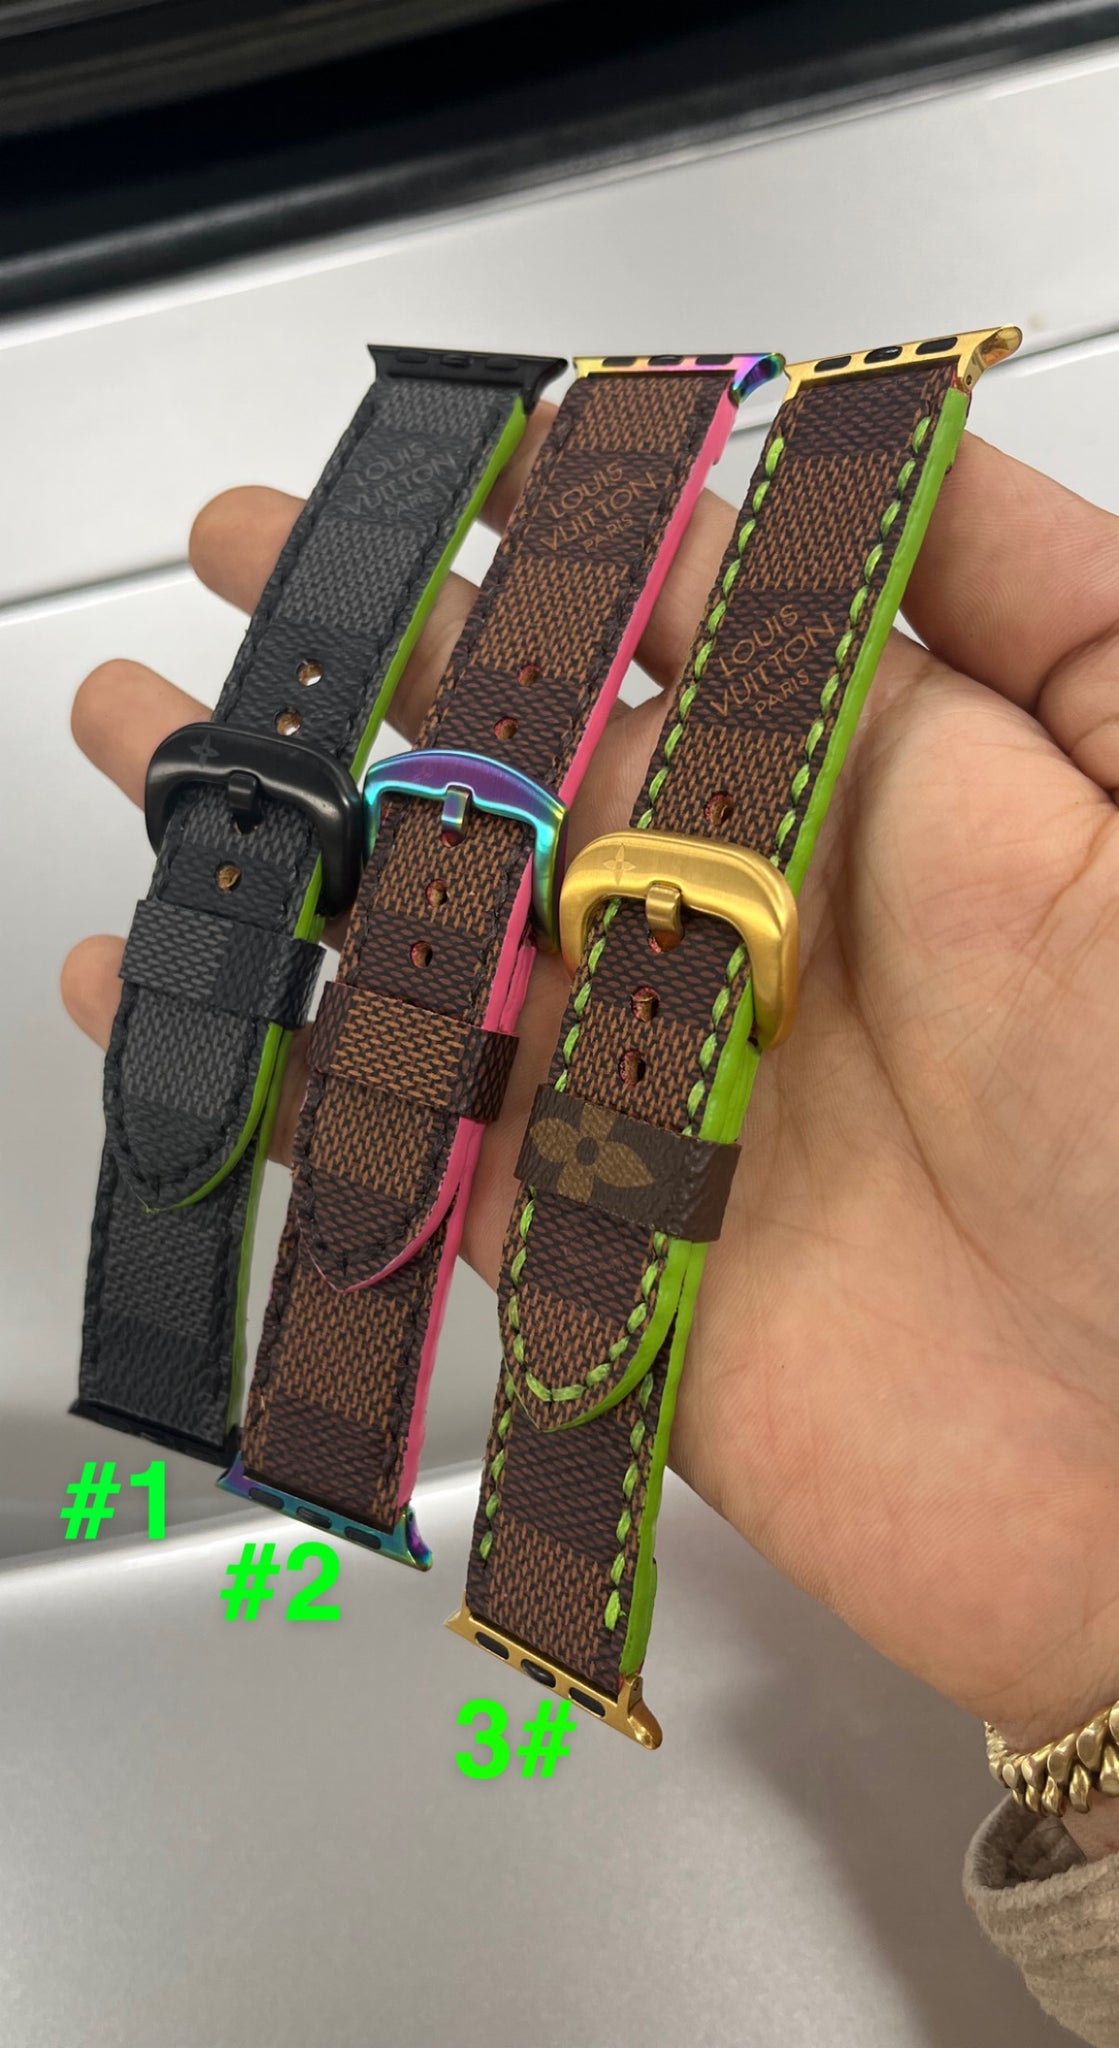 Upcycled LV Apple Watch Bands - Damier Graphite